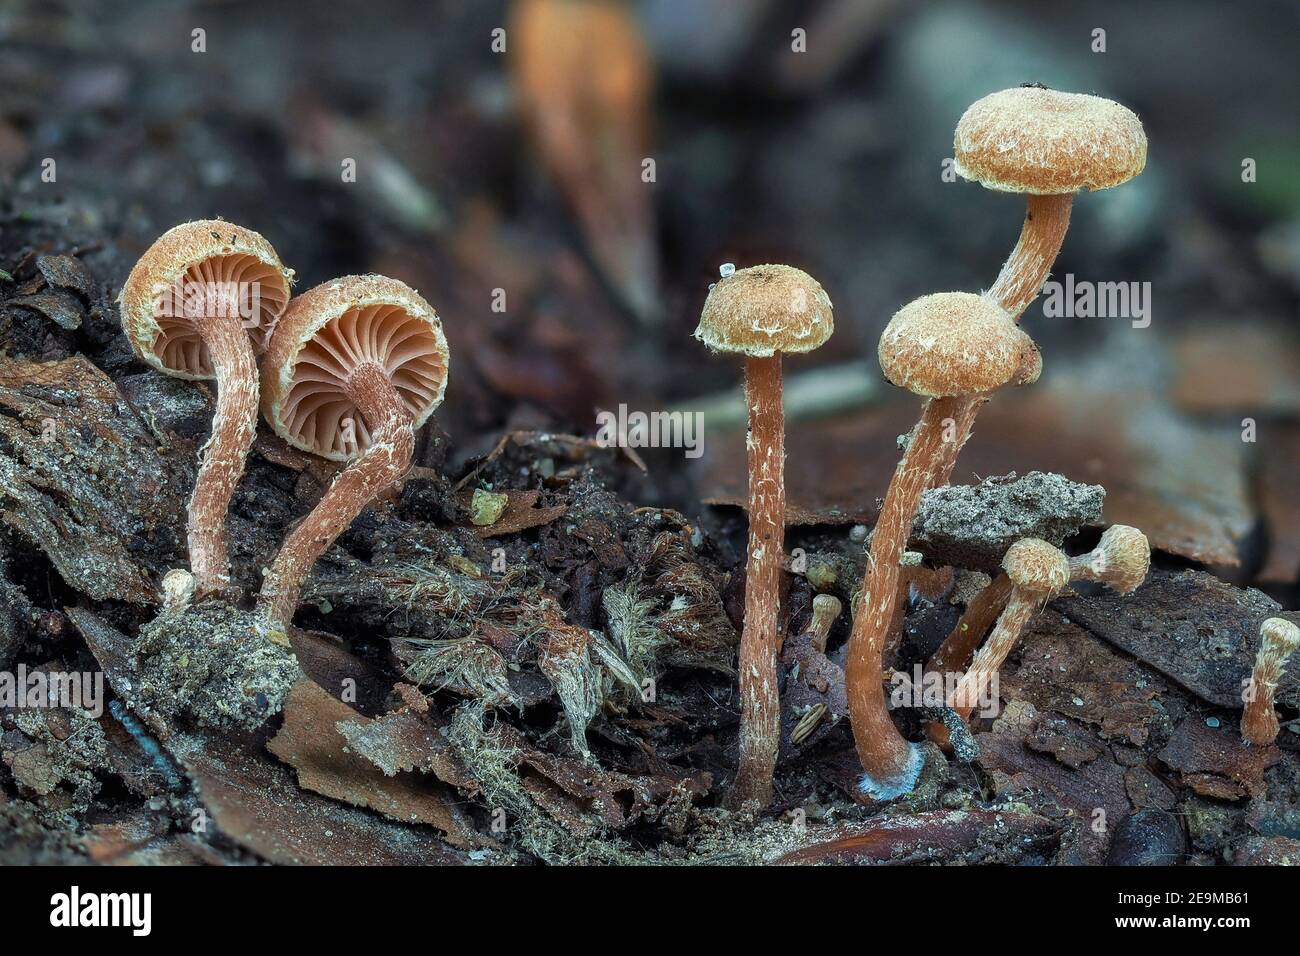 The Felted twiglet (Tubaria conspersa) is an inedible mushroom , an intresting photo Stock Photo